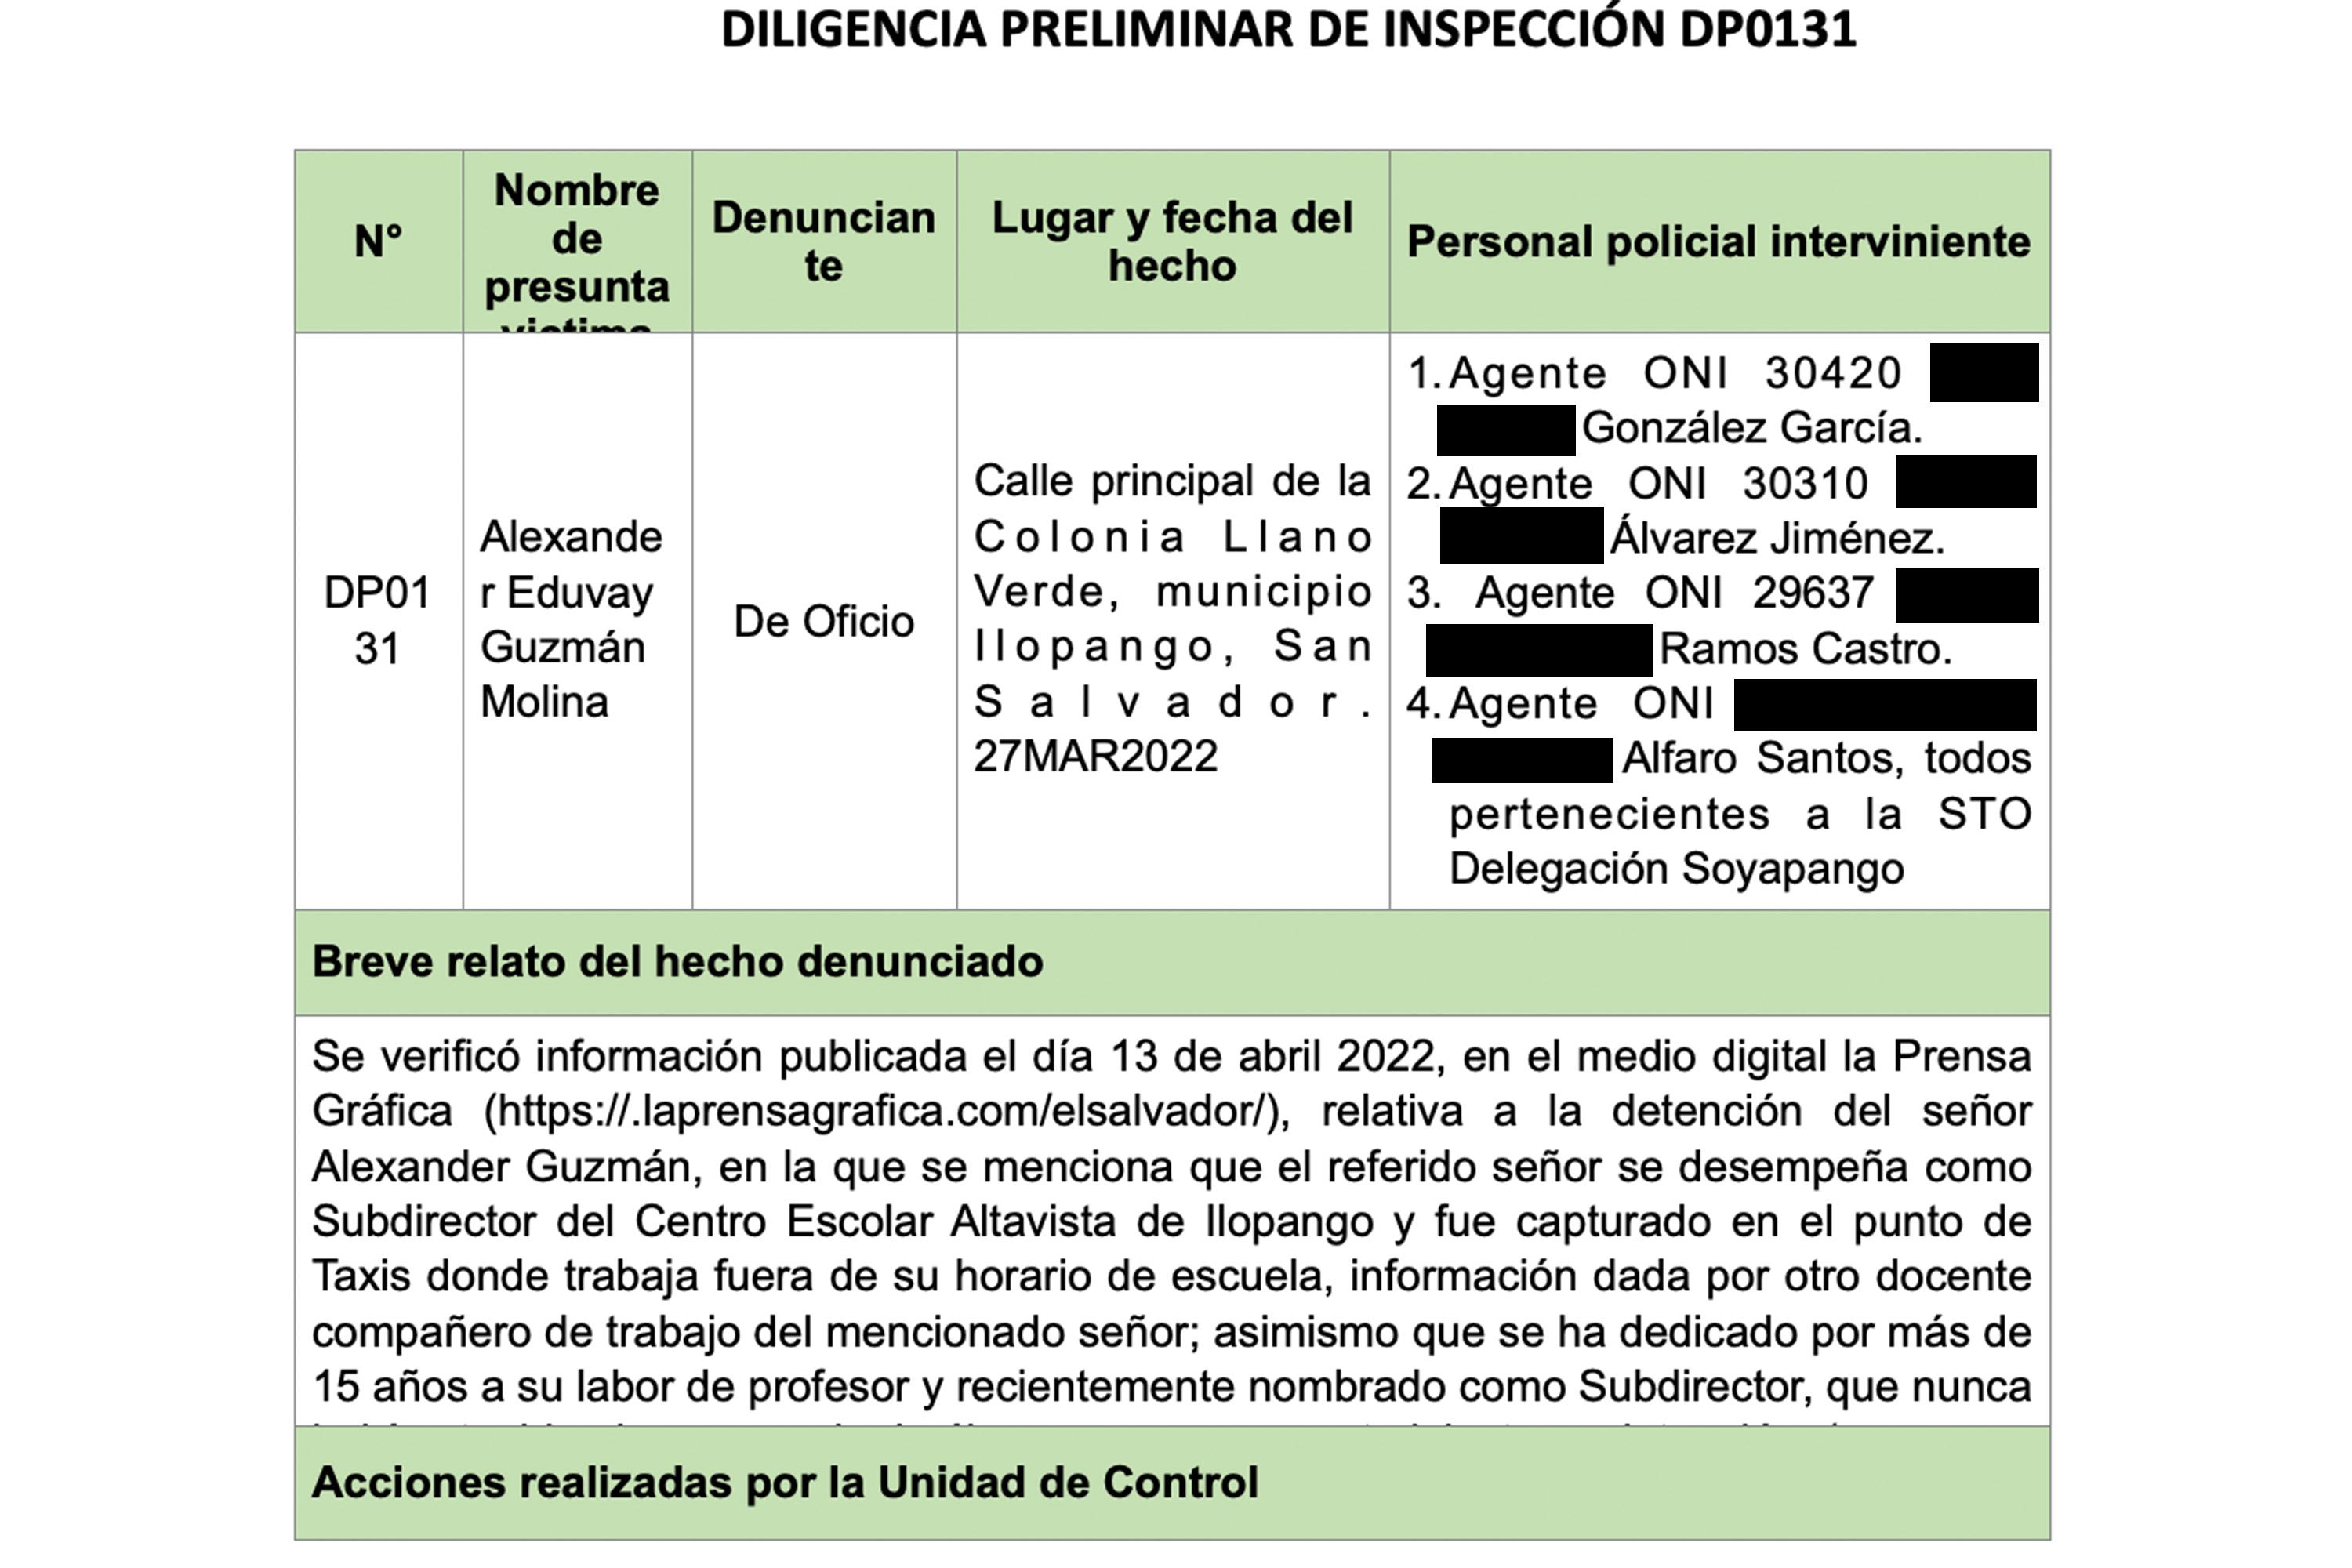 A document in Spanish from the Internal Control Unit of the National Civil Police, which investigated Guzman’s case as an arbitrary arrest.